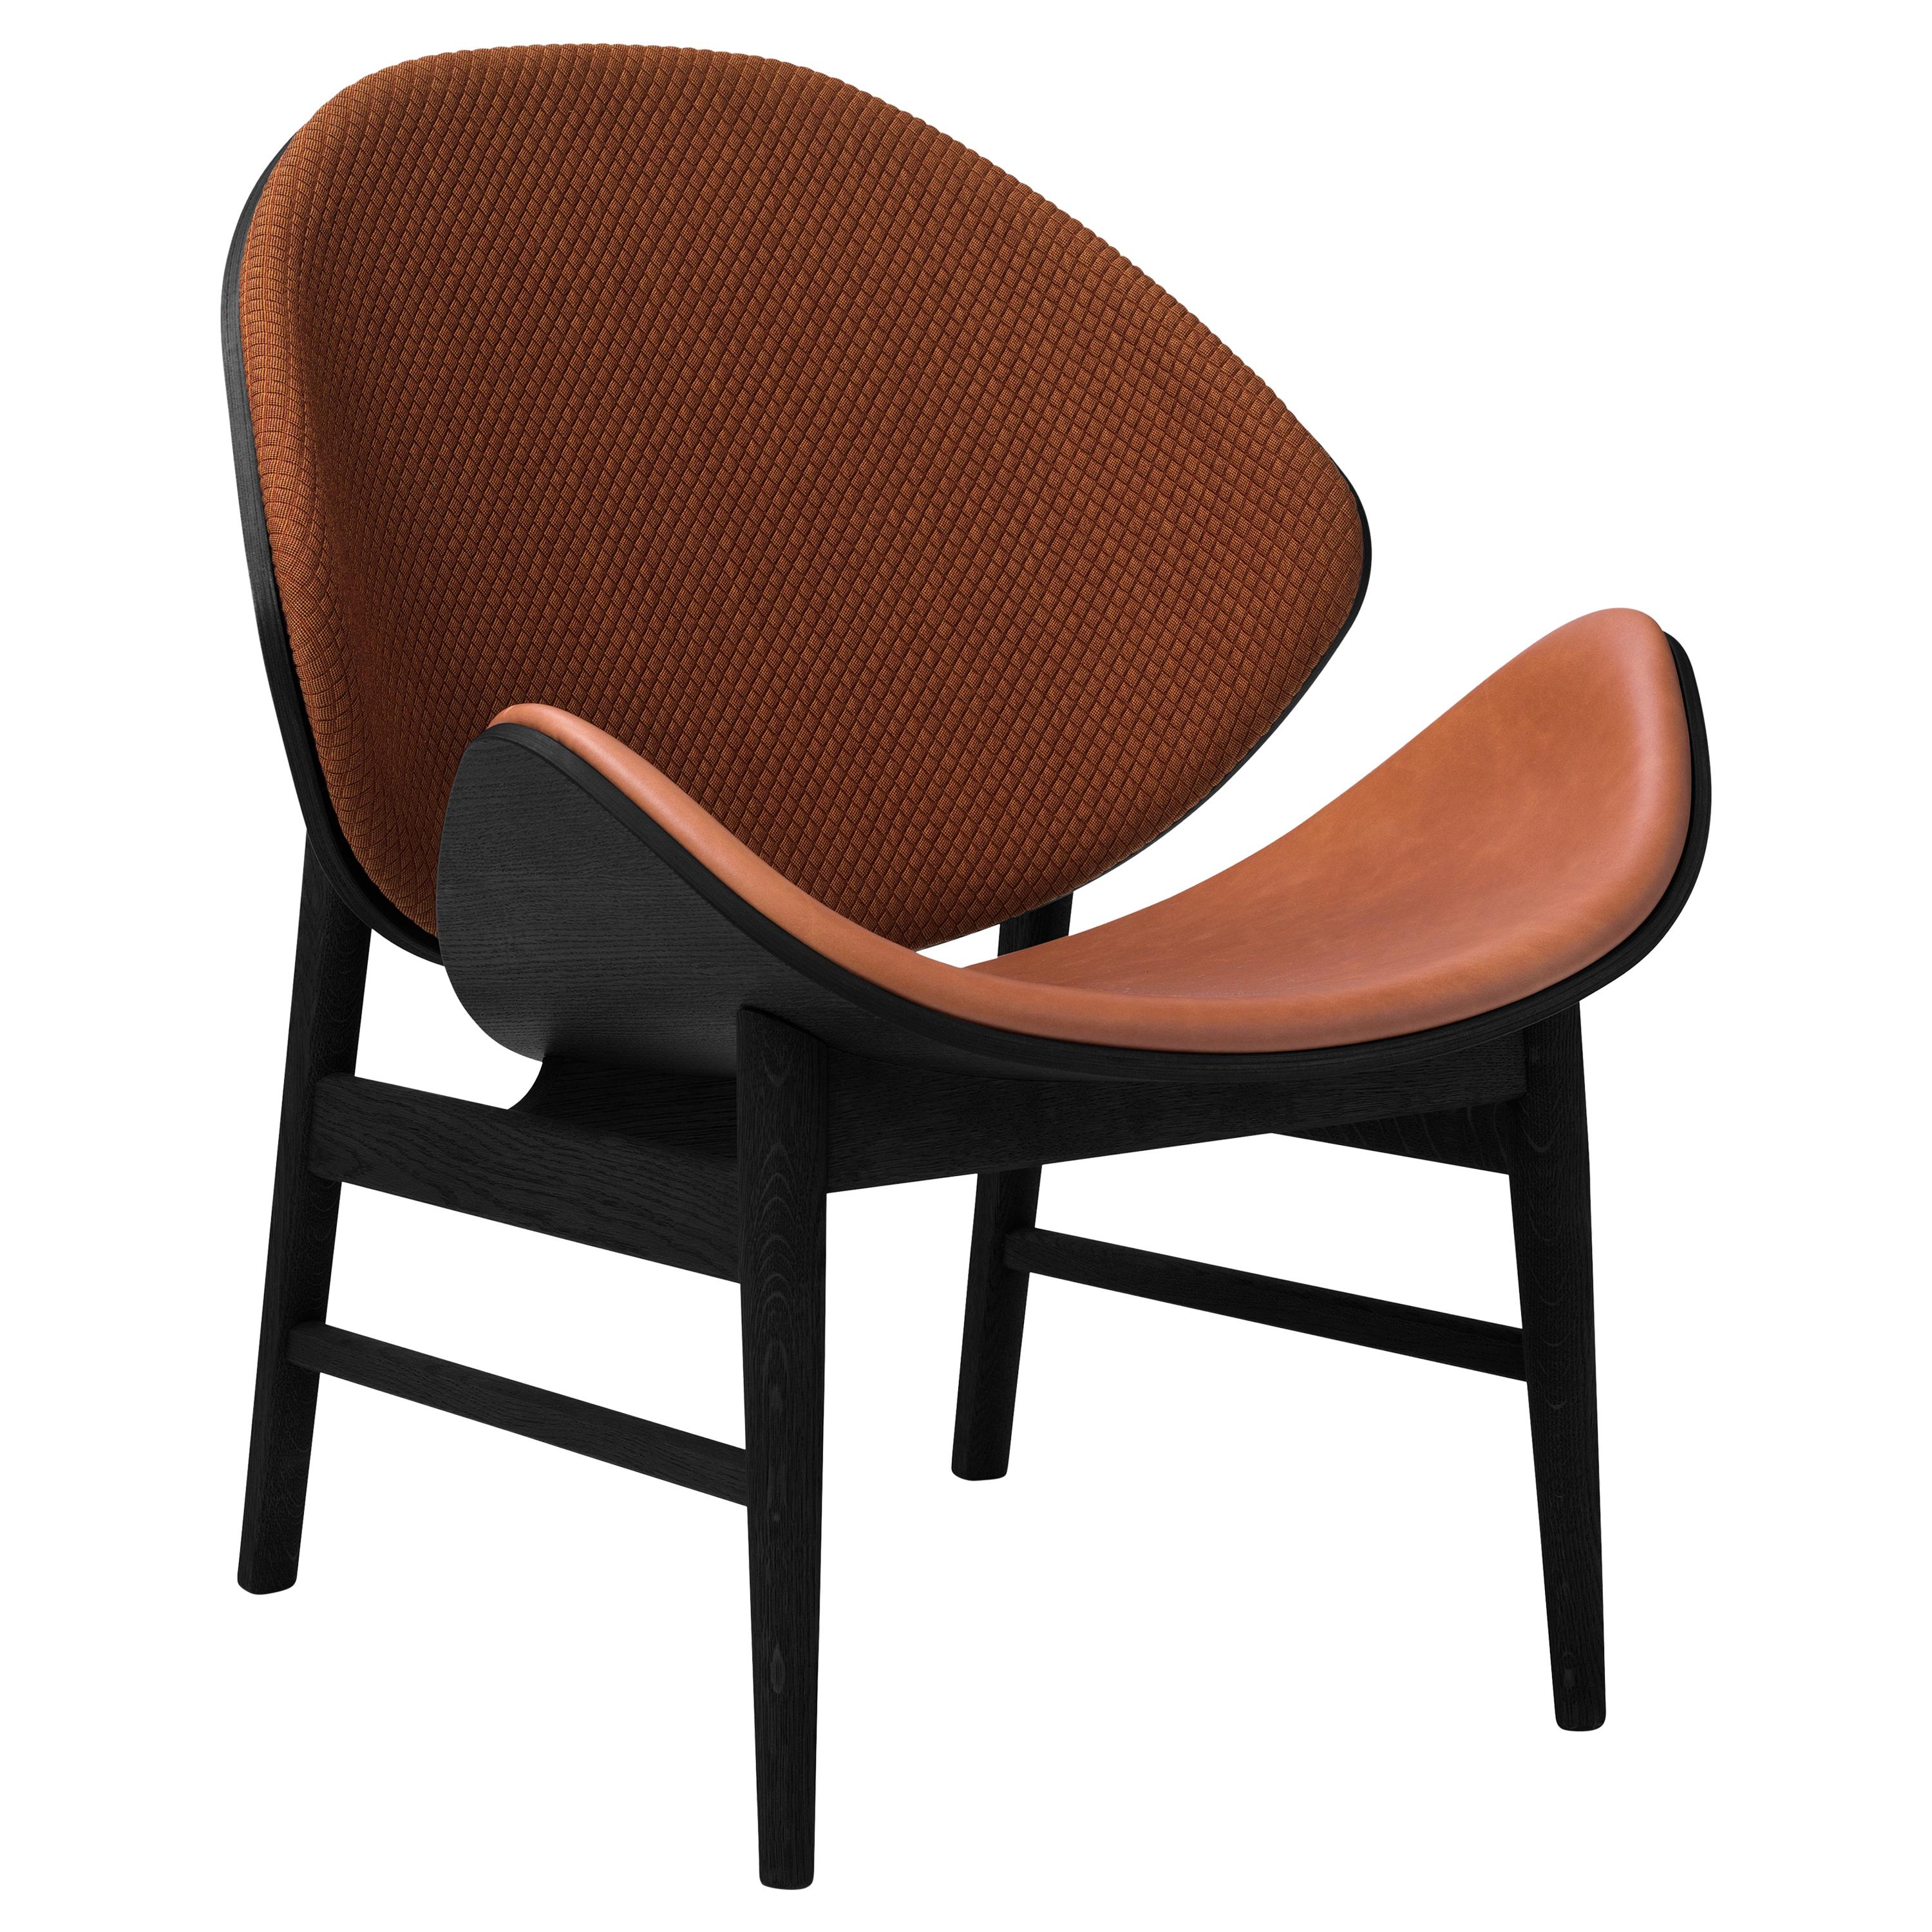 Orange Two-Tone Lounge Chair in Black Oak with Upholstery, by Hans Olsen